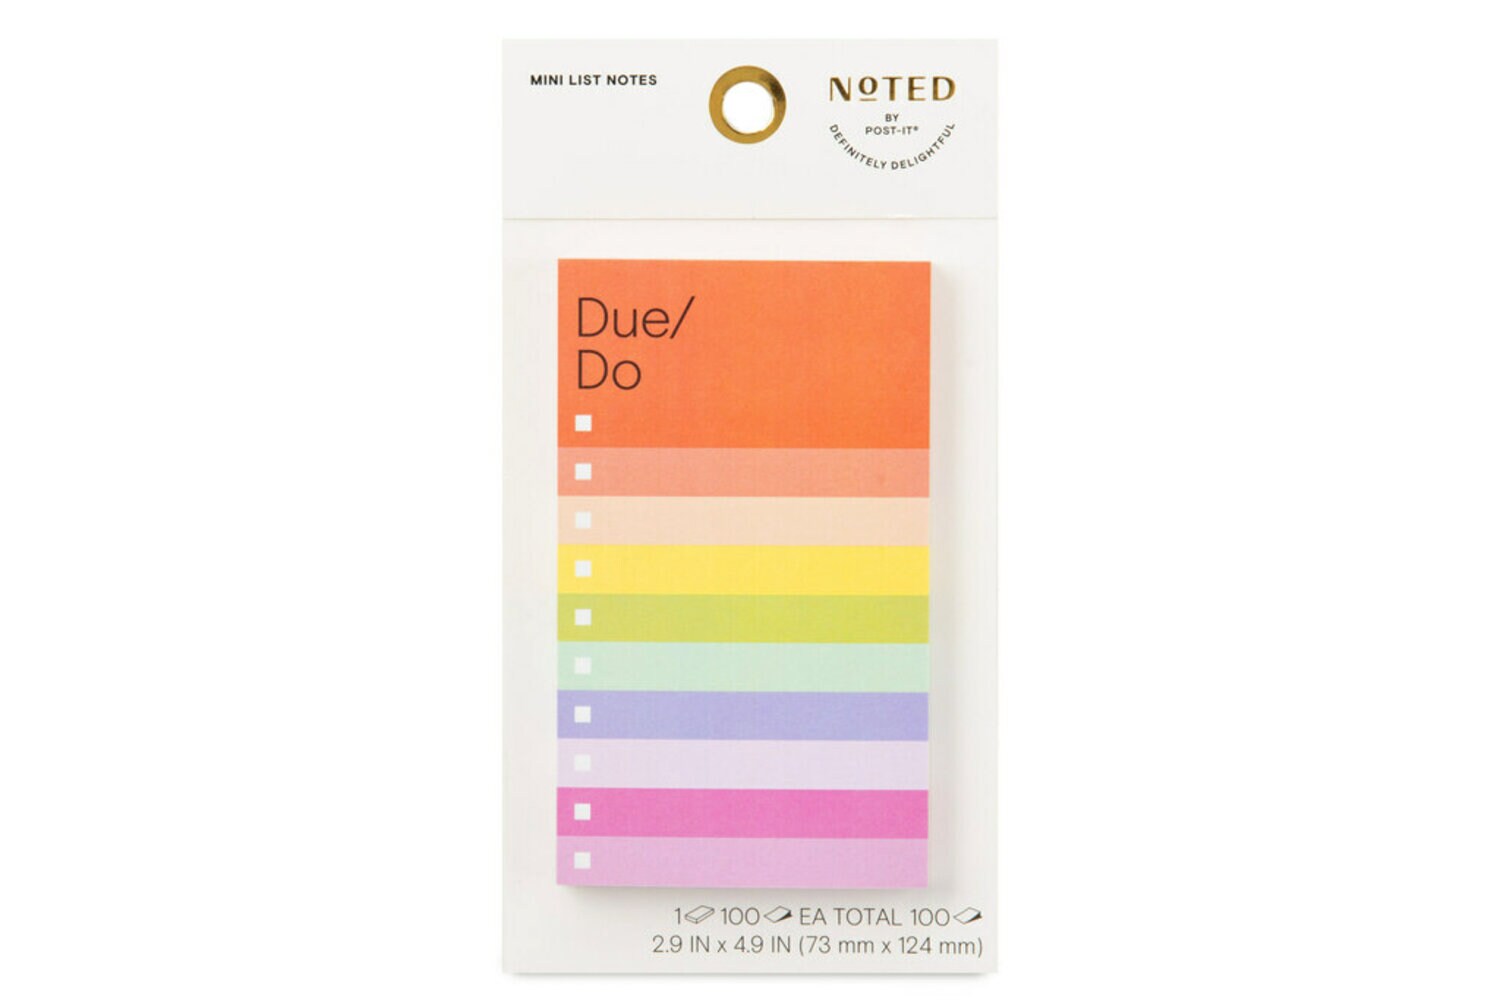 Post-it Super Sticky Notes 5845-SS, 5 in x 8 in (127 mm x 203 mm